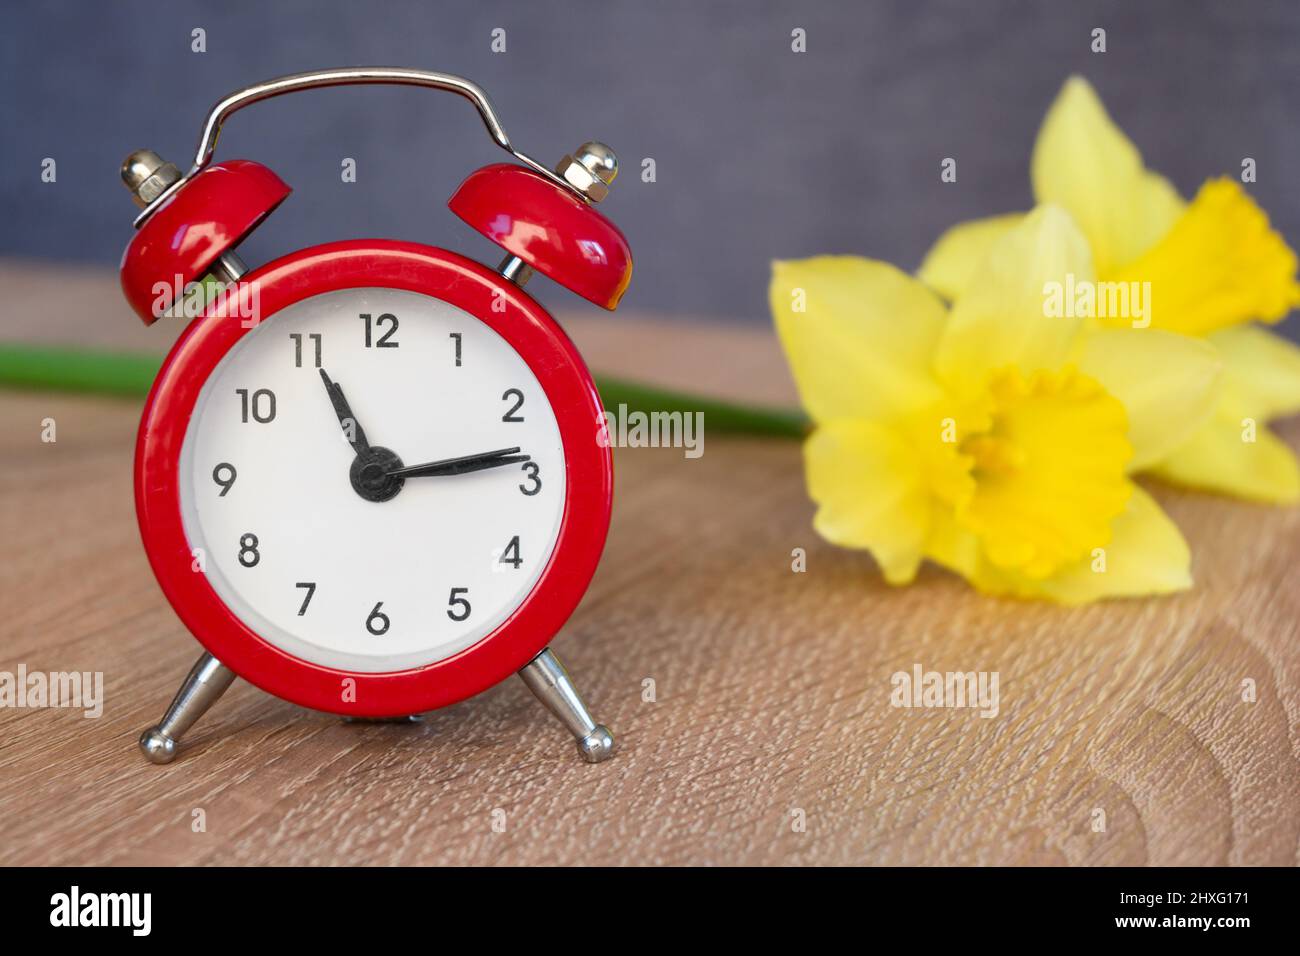 Alarm clock with fresh flowers. Spring summer time change Stock Photo